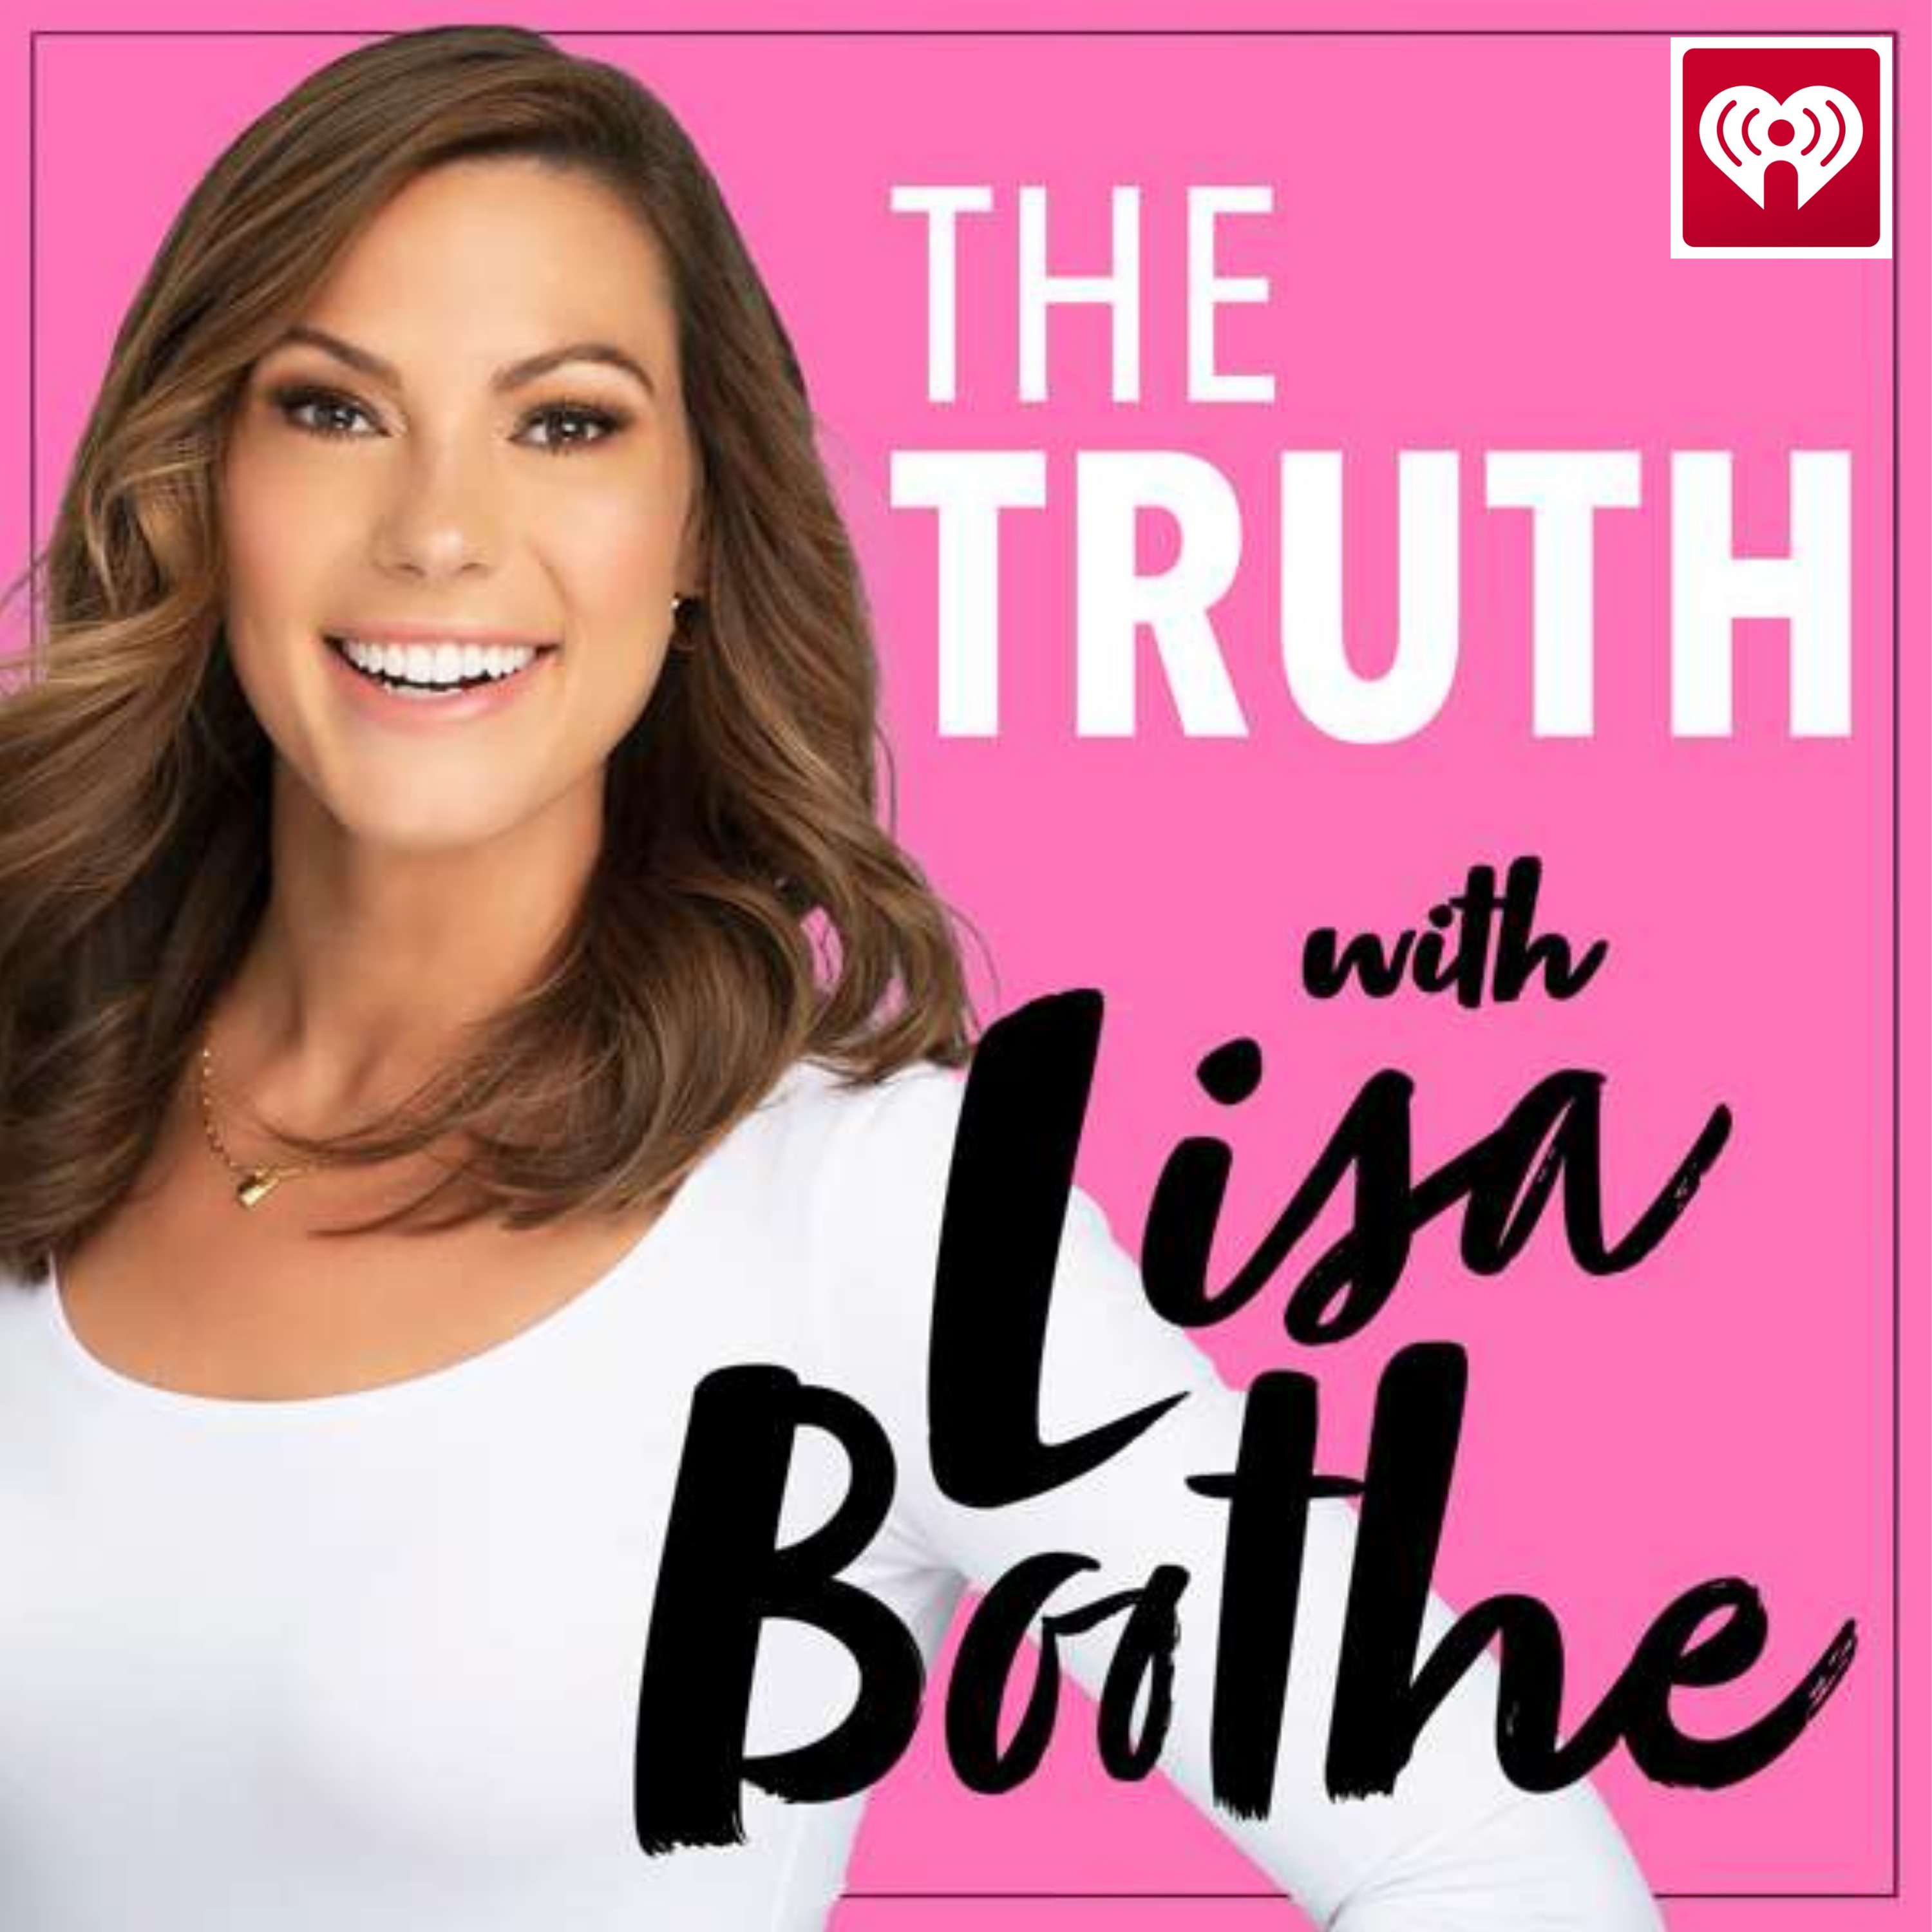 The Truth with Lisa Boothe: Is the Republican Party Ready for the Next Presidential Election?